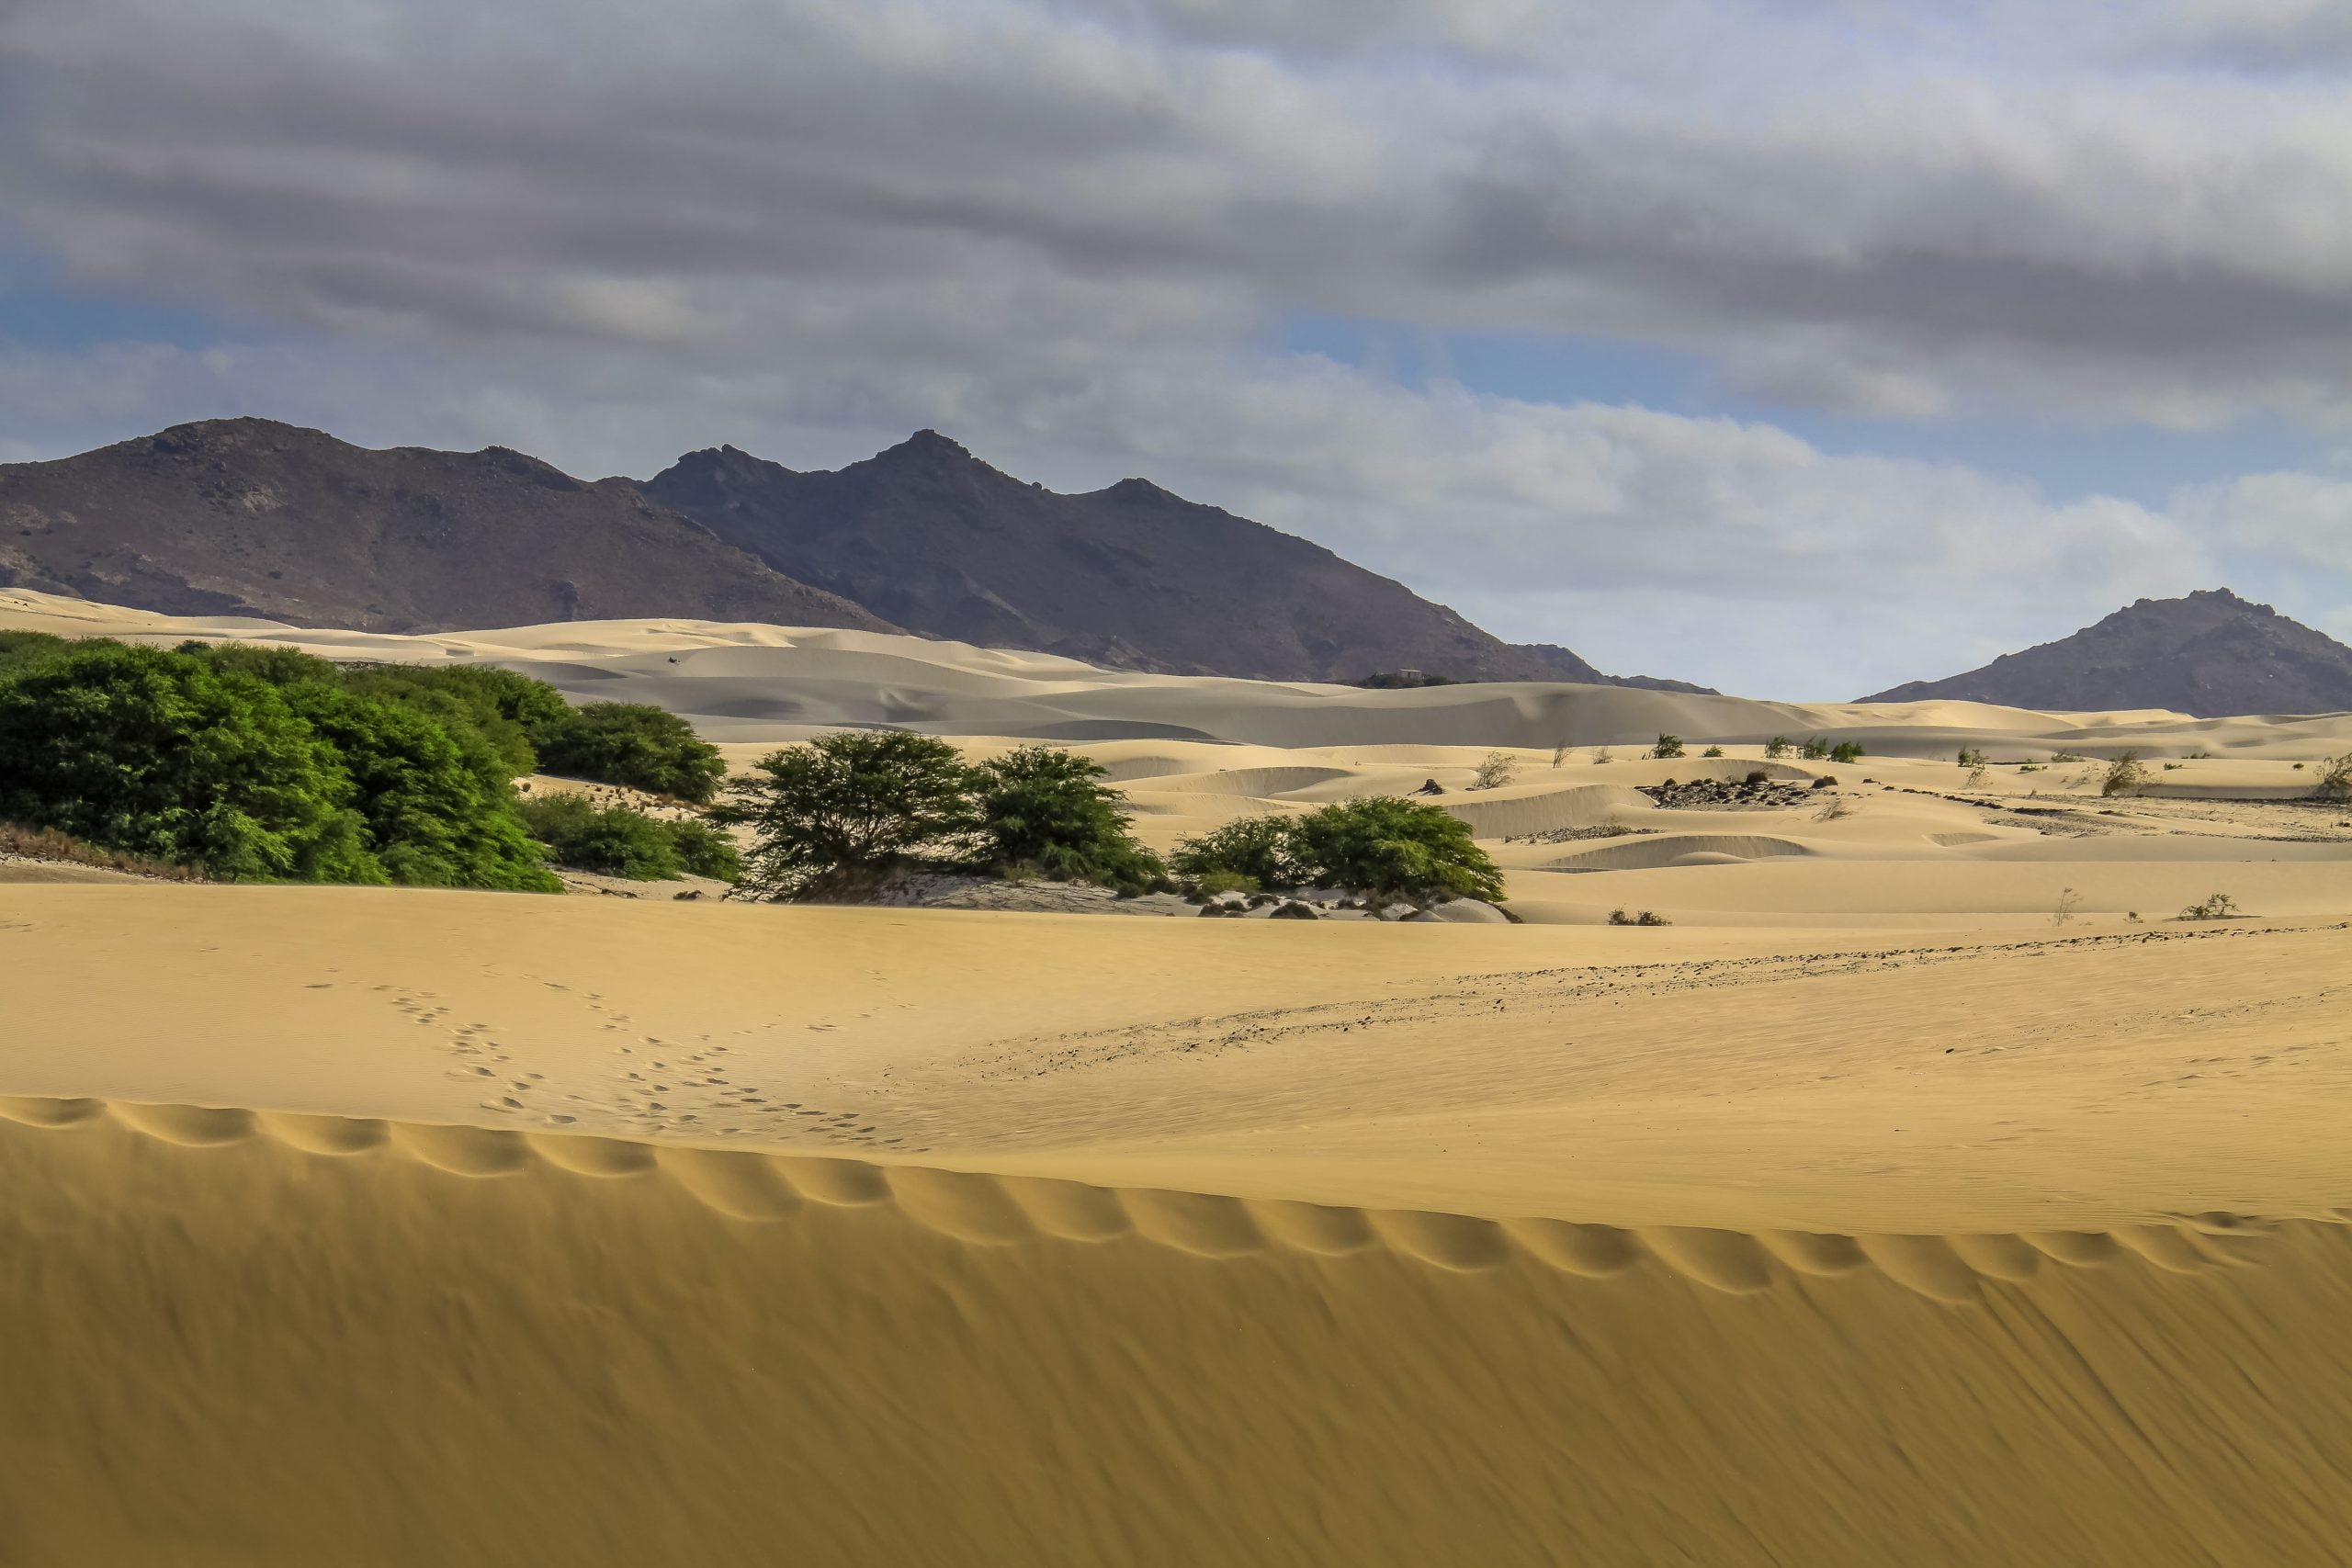 The desert sand with extinct volcanoes in the background, on Boa Vista, the capital of Cape Verde.